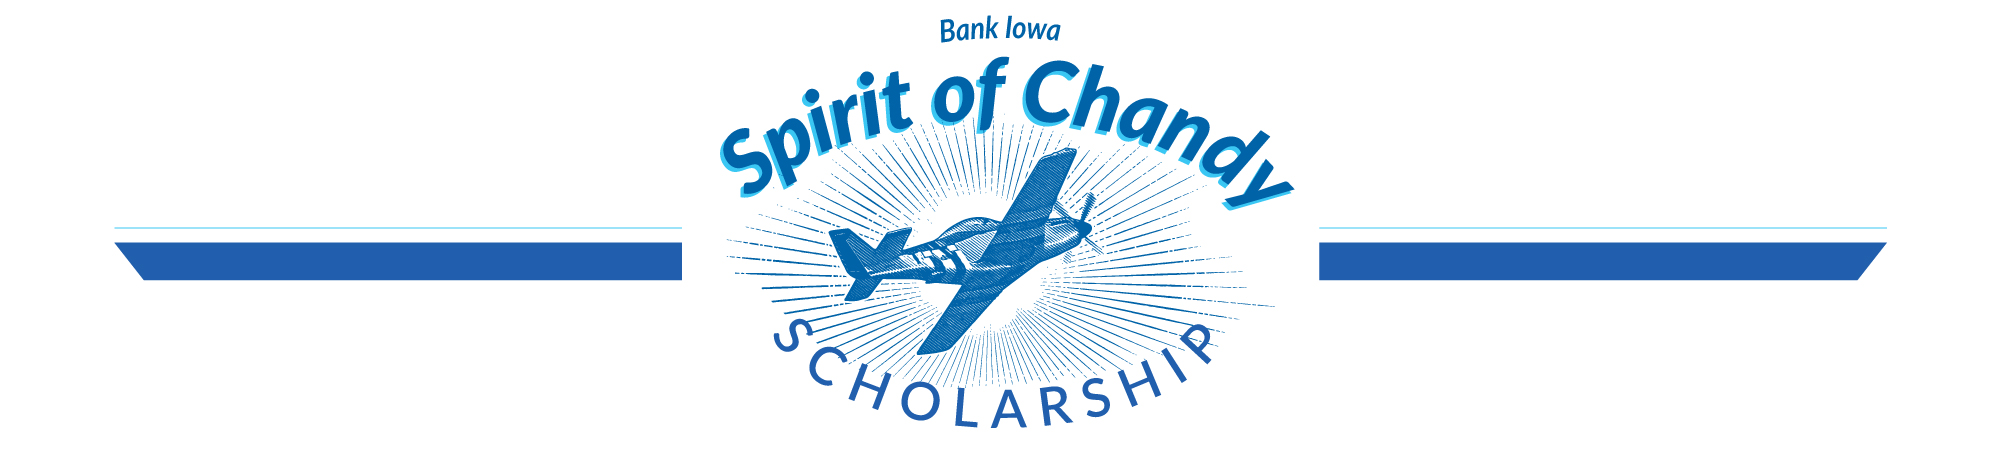 Applications Are Open for Bank Iowa $1,000 Spirit of Ch